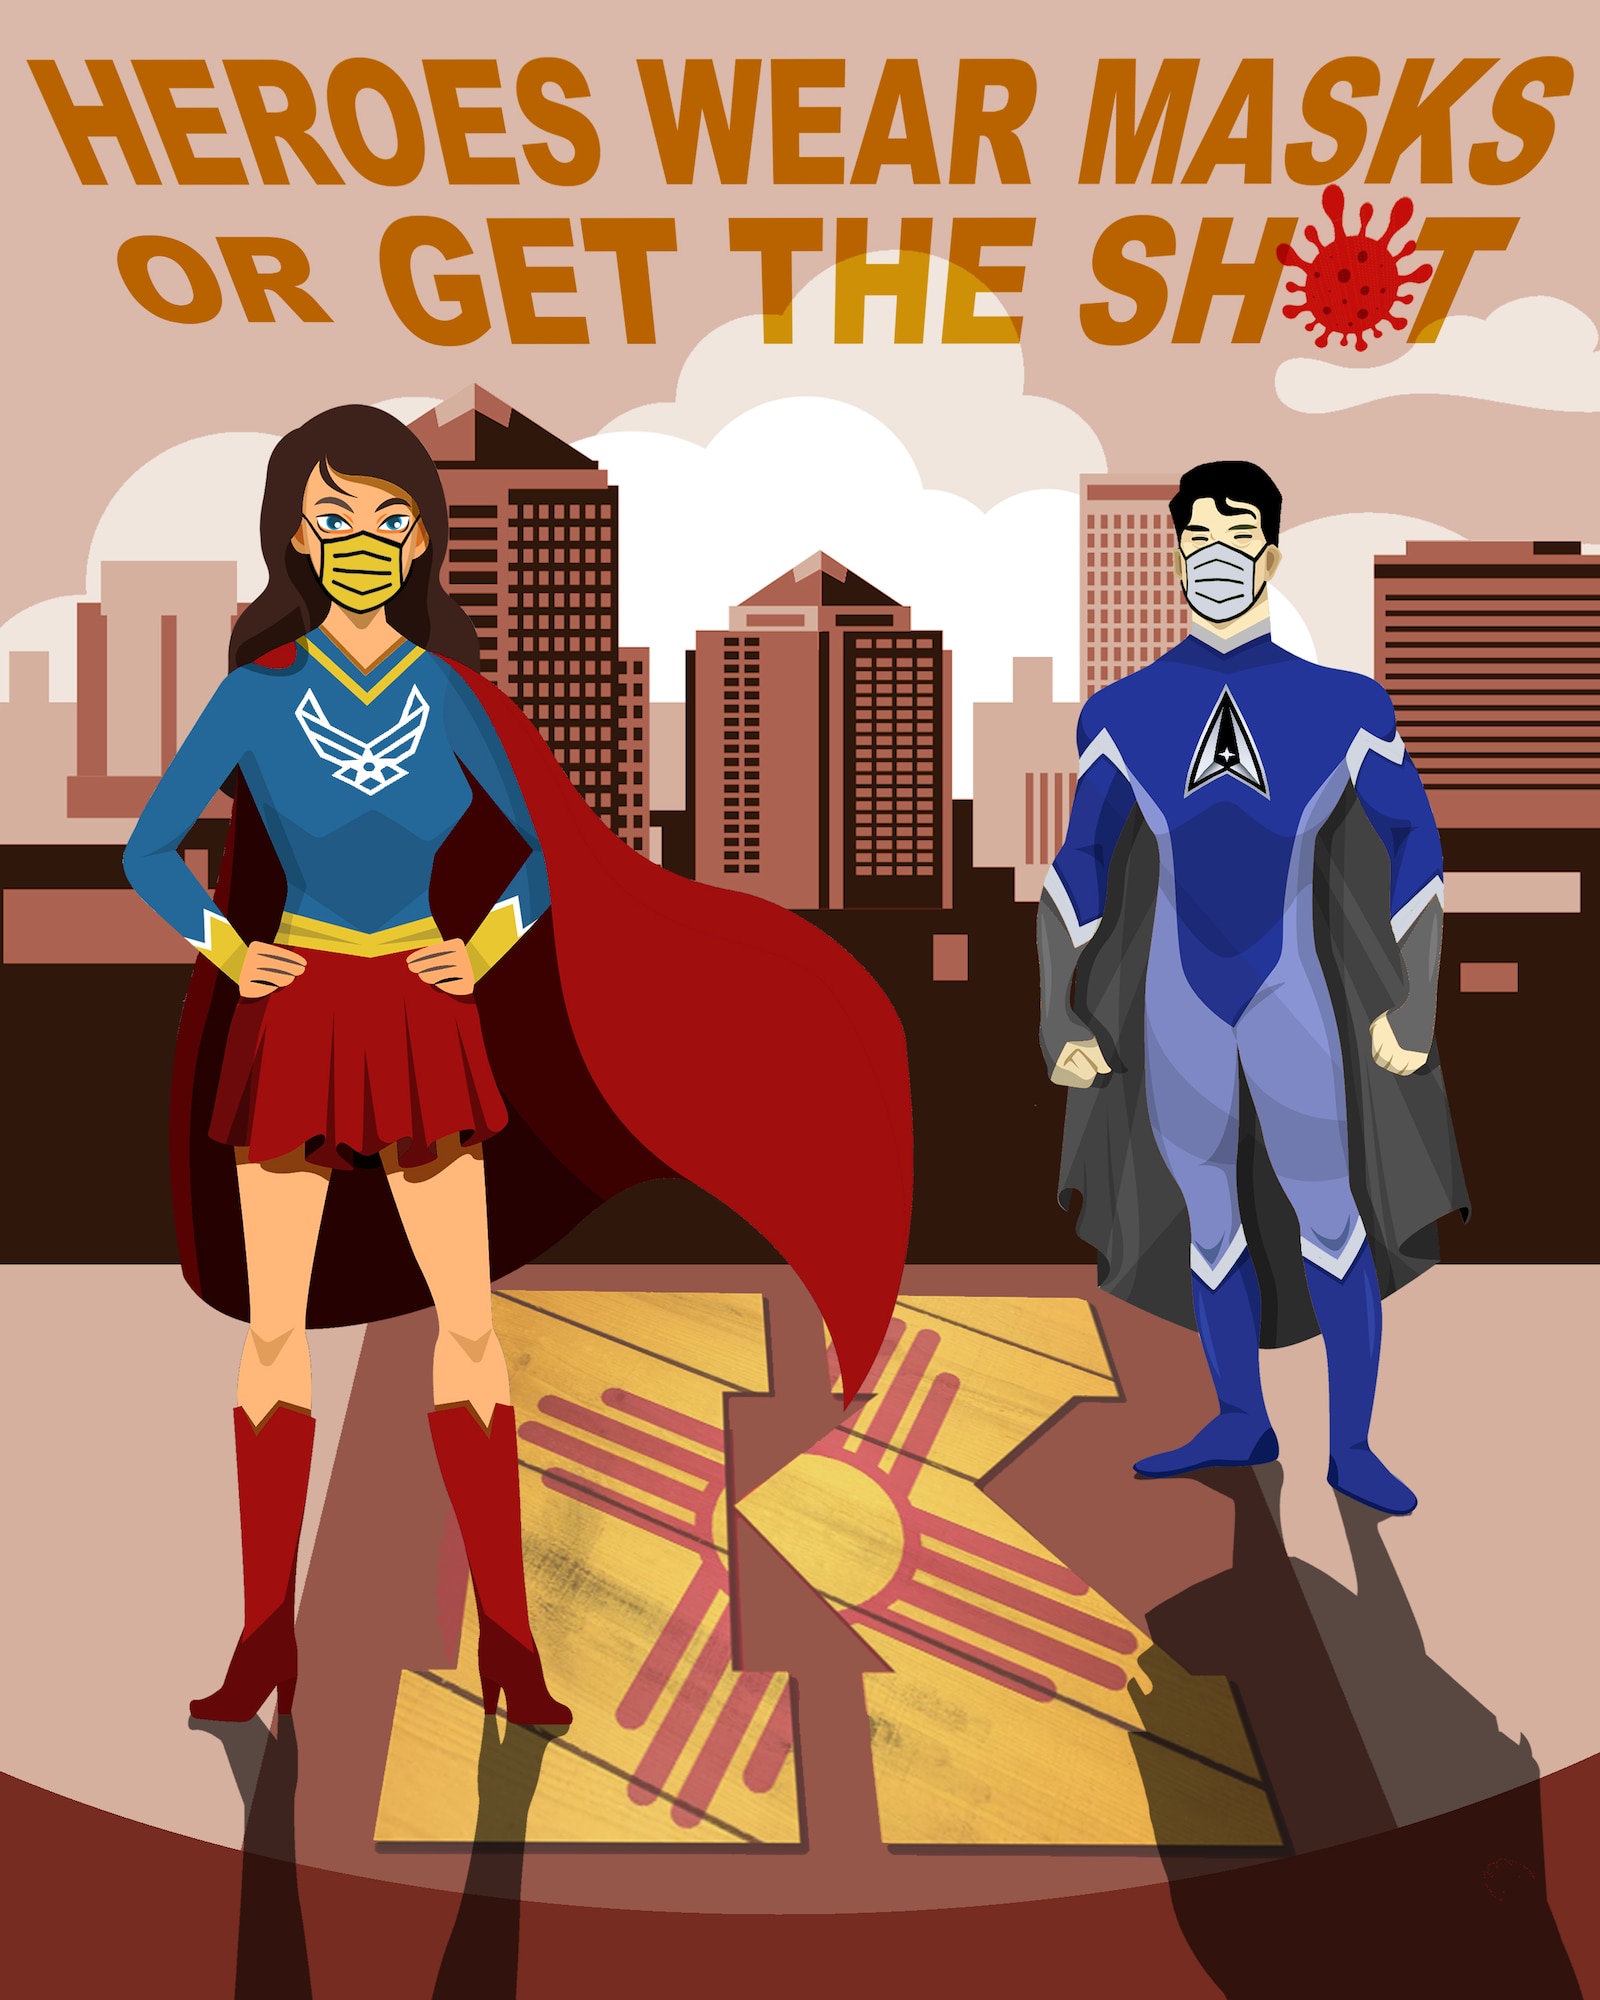 Graphic of two superheroes, one male and another female, both wearing face masks encouraging members of Team Kirtland to get vaccinated or wear masks.